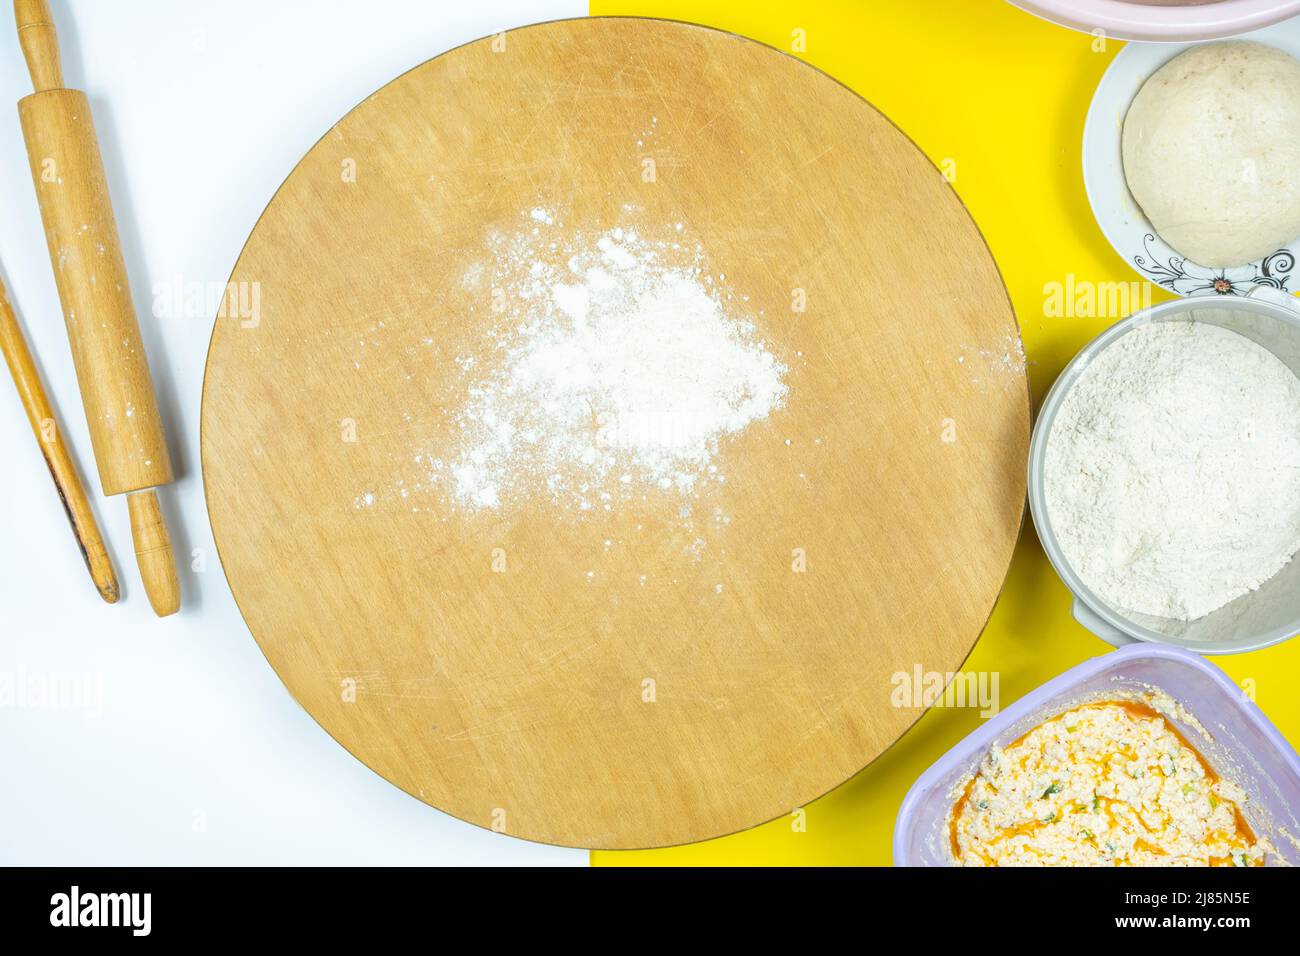 Rolling pins and traditional circle wooden board with ingredients, ingredients in the plate, top view of roller and some flour, making homemade meal Stock Photo